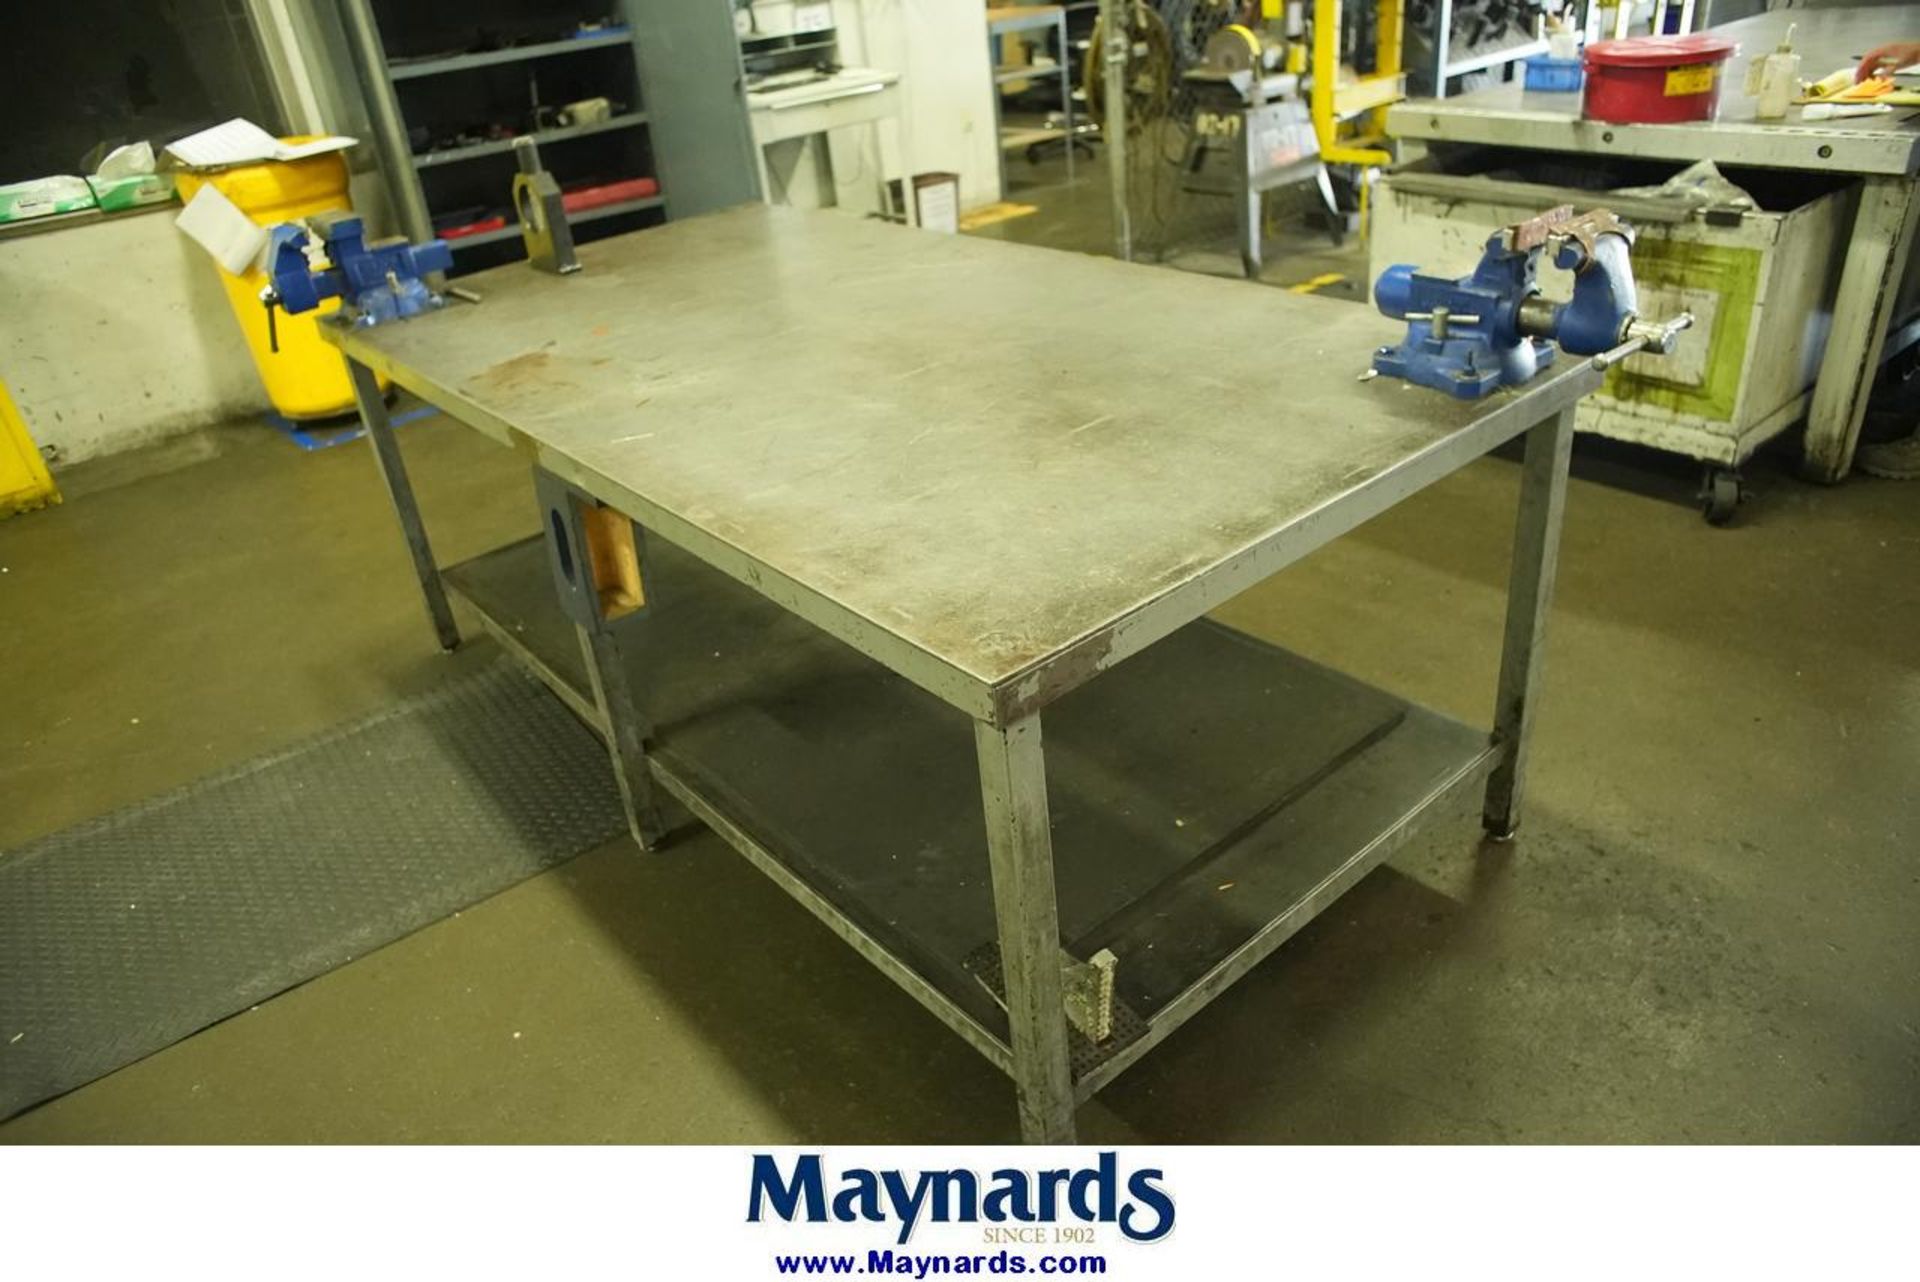 4' x 8' x 3' H Metal Table w/ (2) Bench Vises - Image 3 of 3